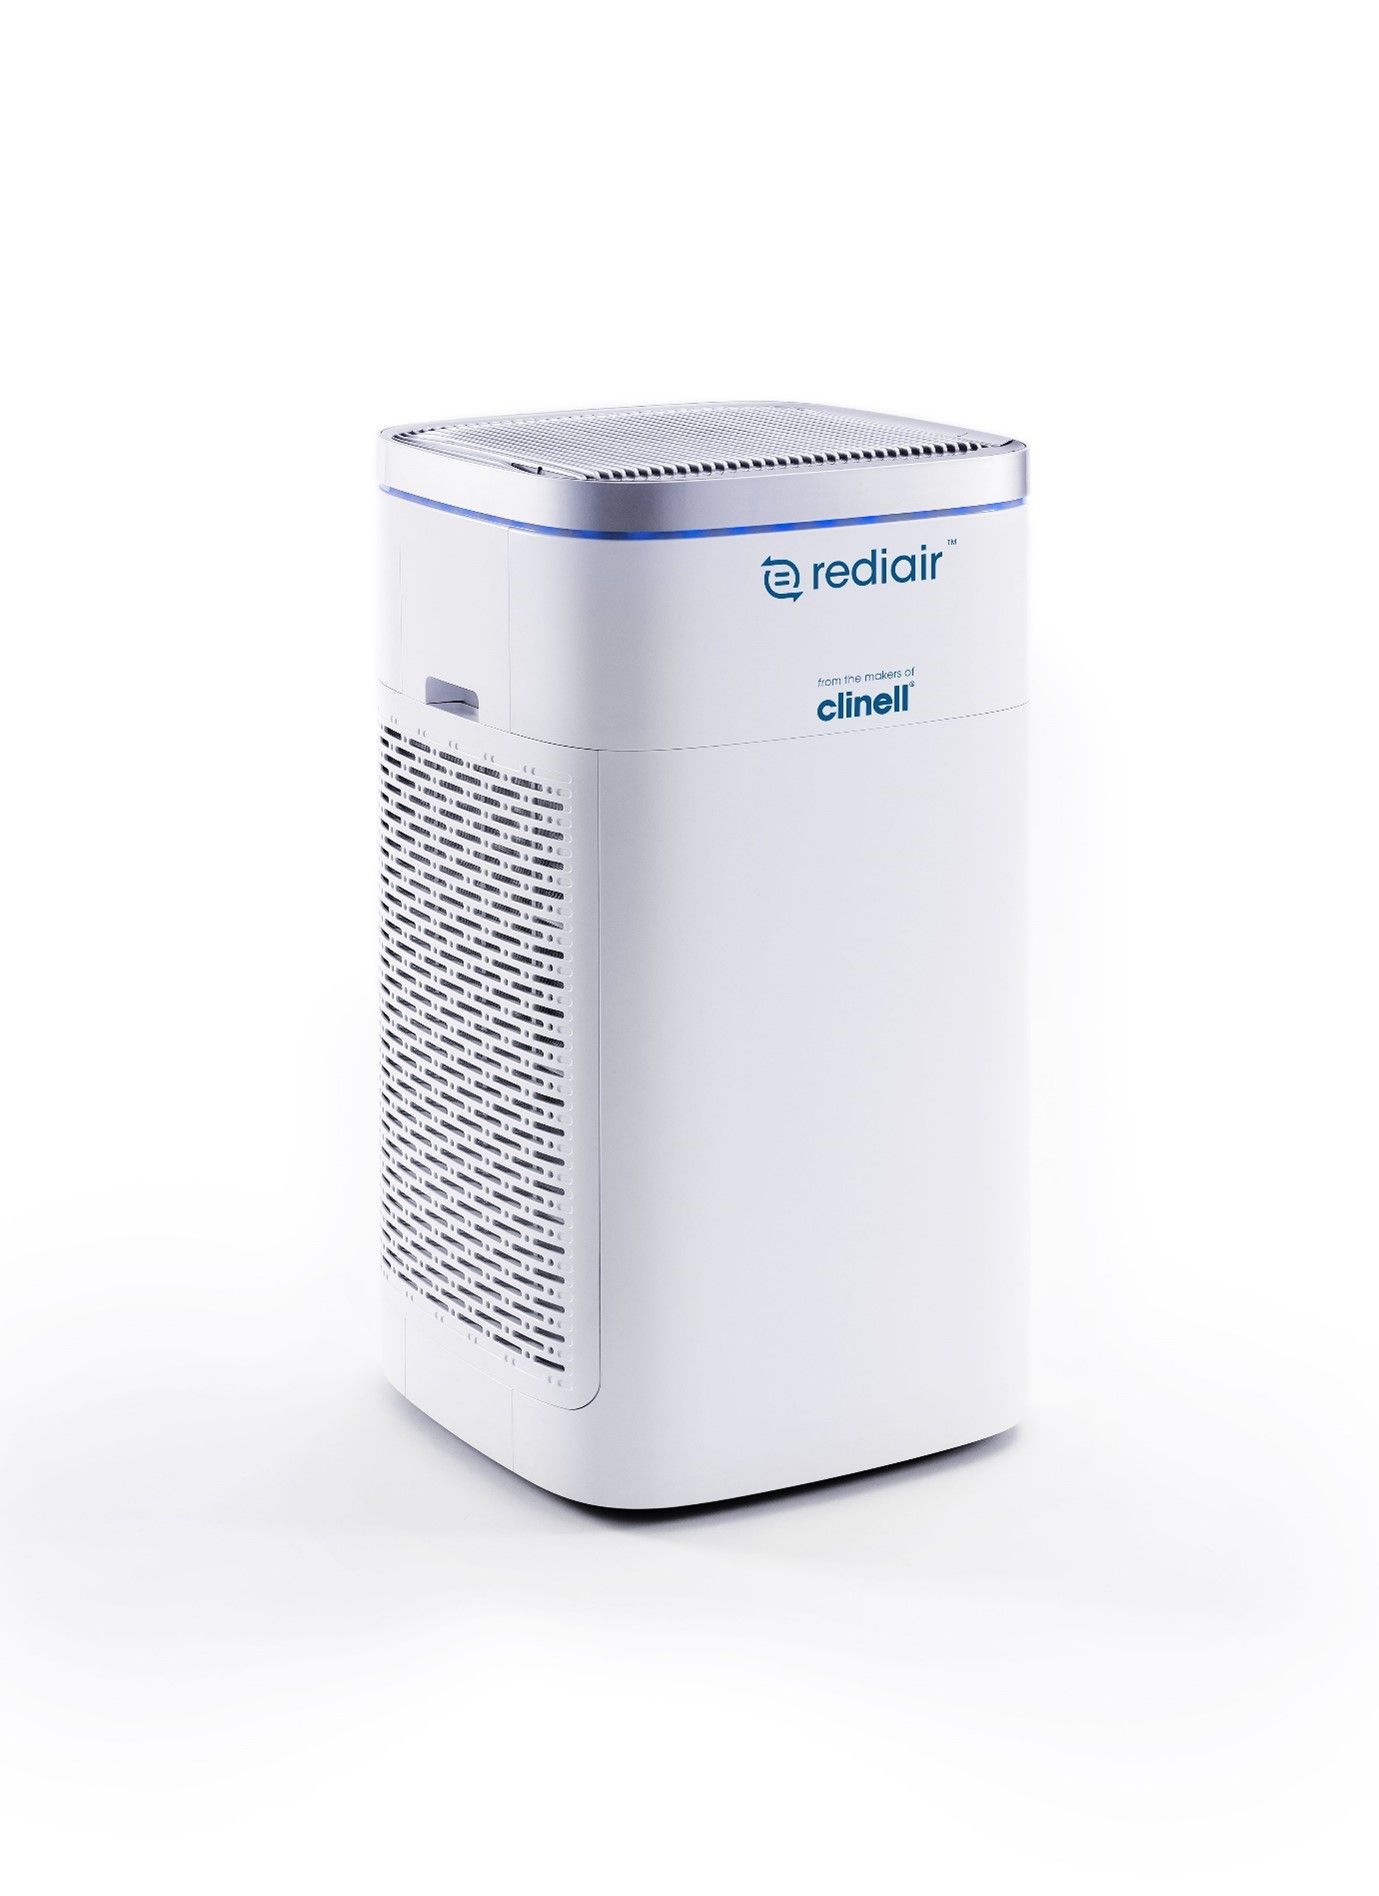 Rediair: Instant Air Filtration from the leaders in Infection Prevention